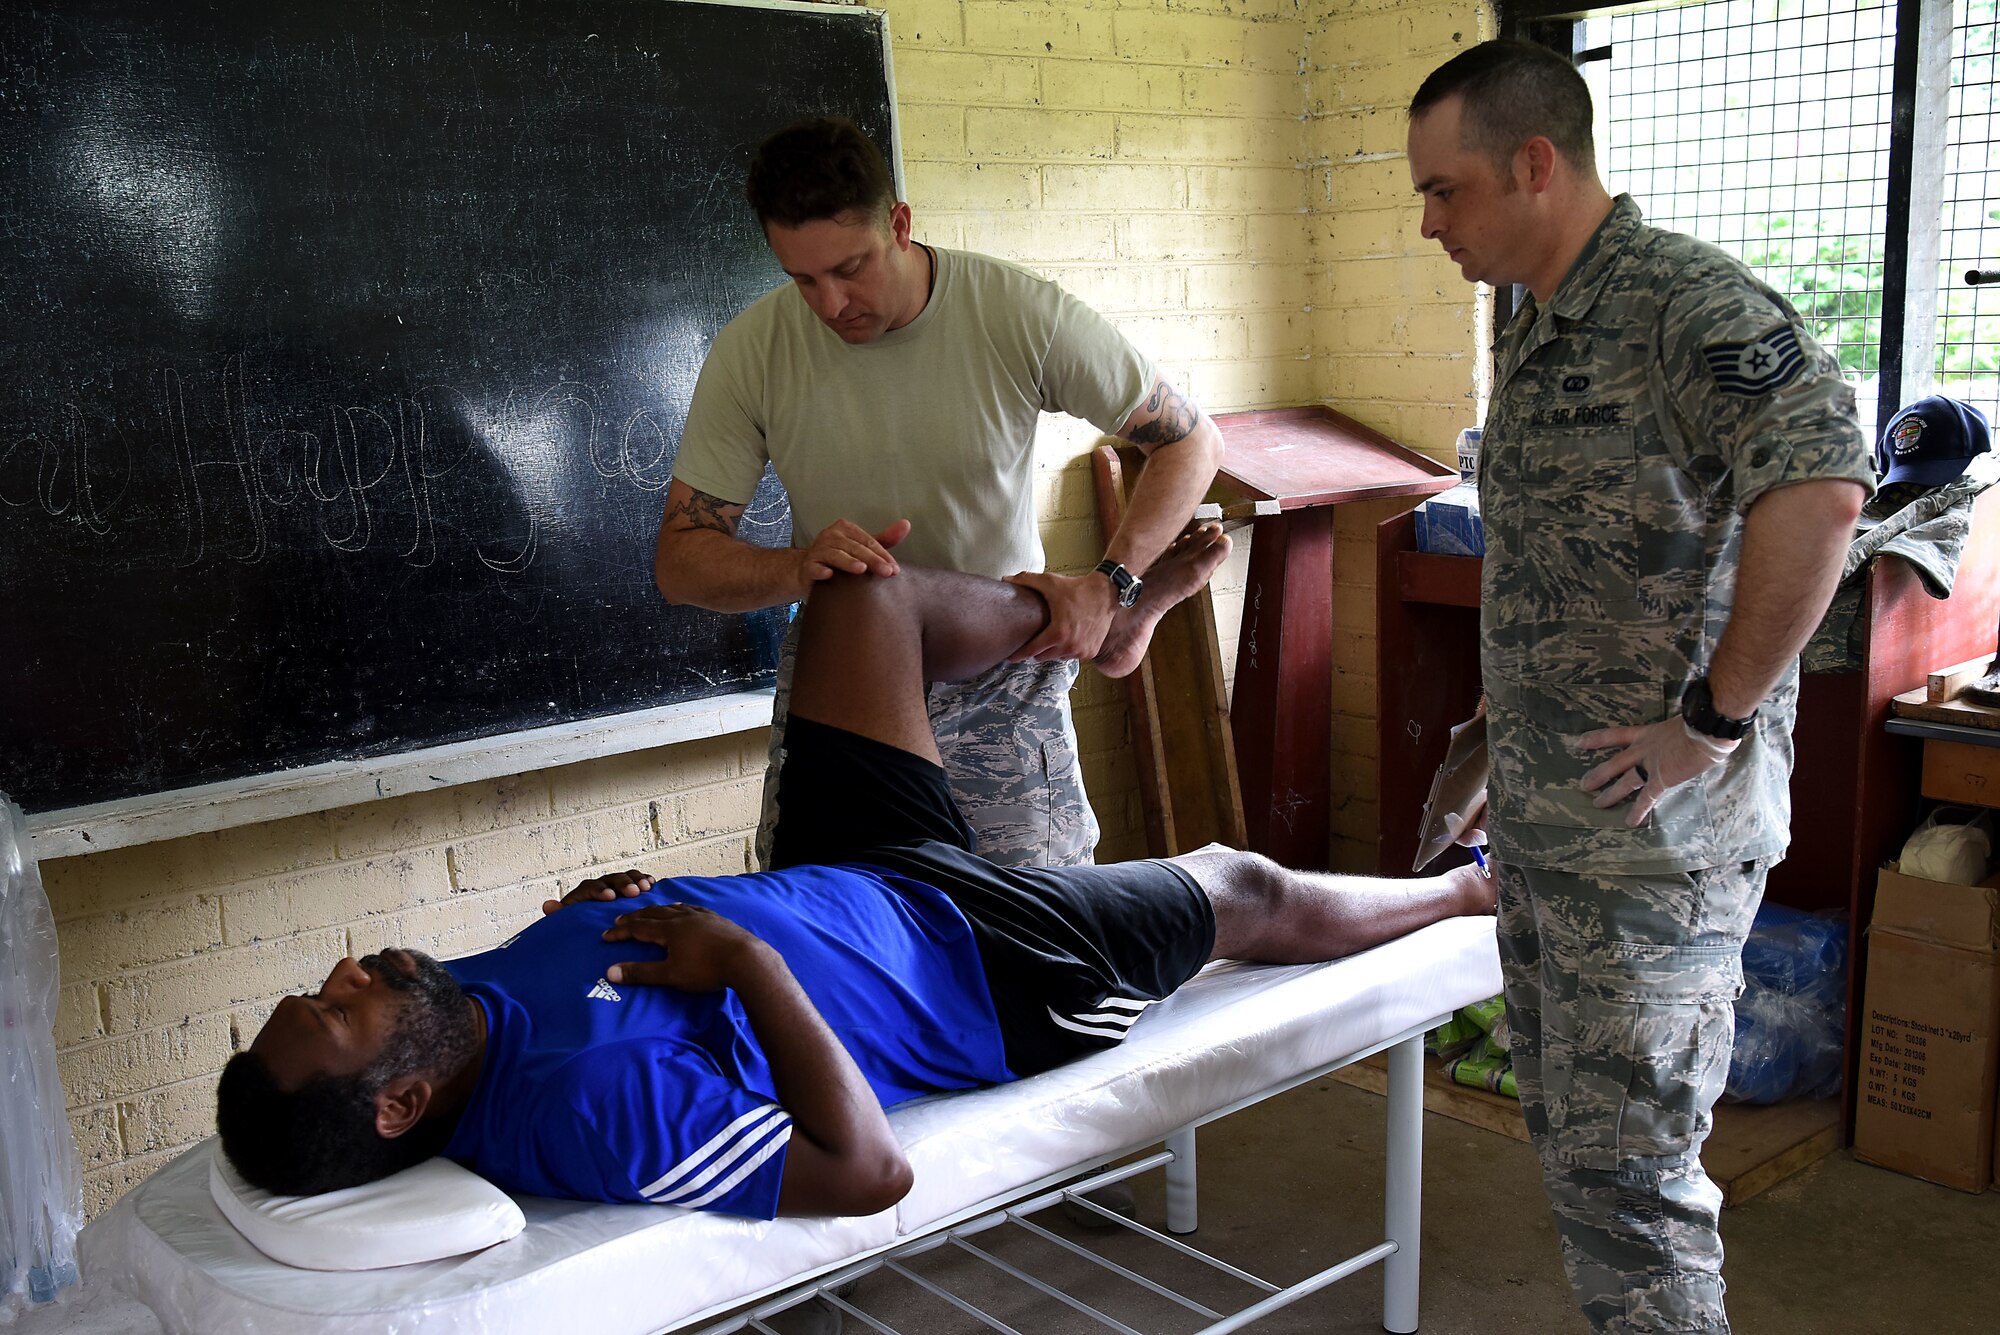 U.S. Air Force Maj. Brian Smith, a physical therapist with the 35th Medical Group, Misawa Air Base, Japan, center, and Tech. Sgt. Manuel Carrillo, a physical therapy technician with the 354th Medical Group, Eielson Air Force Base, Alaska, check a patient’s range of motion at Tata Primary and Secondary School during Pacific Angel 18-3 in Luganville, Espiritu Santo Island, Vanuatu, July 16, 2018.